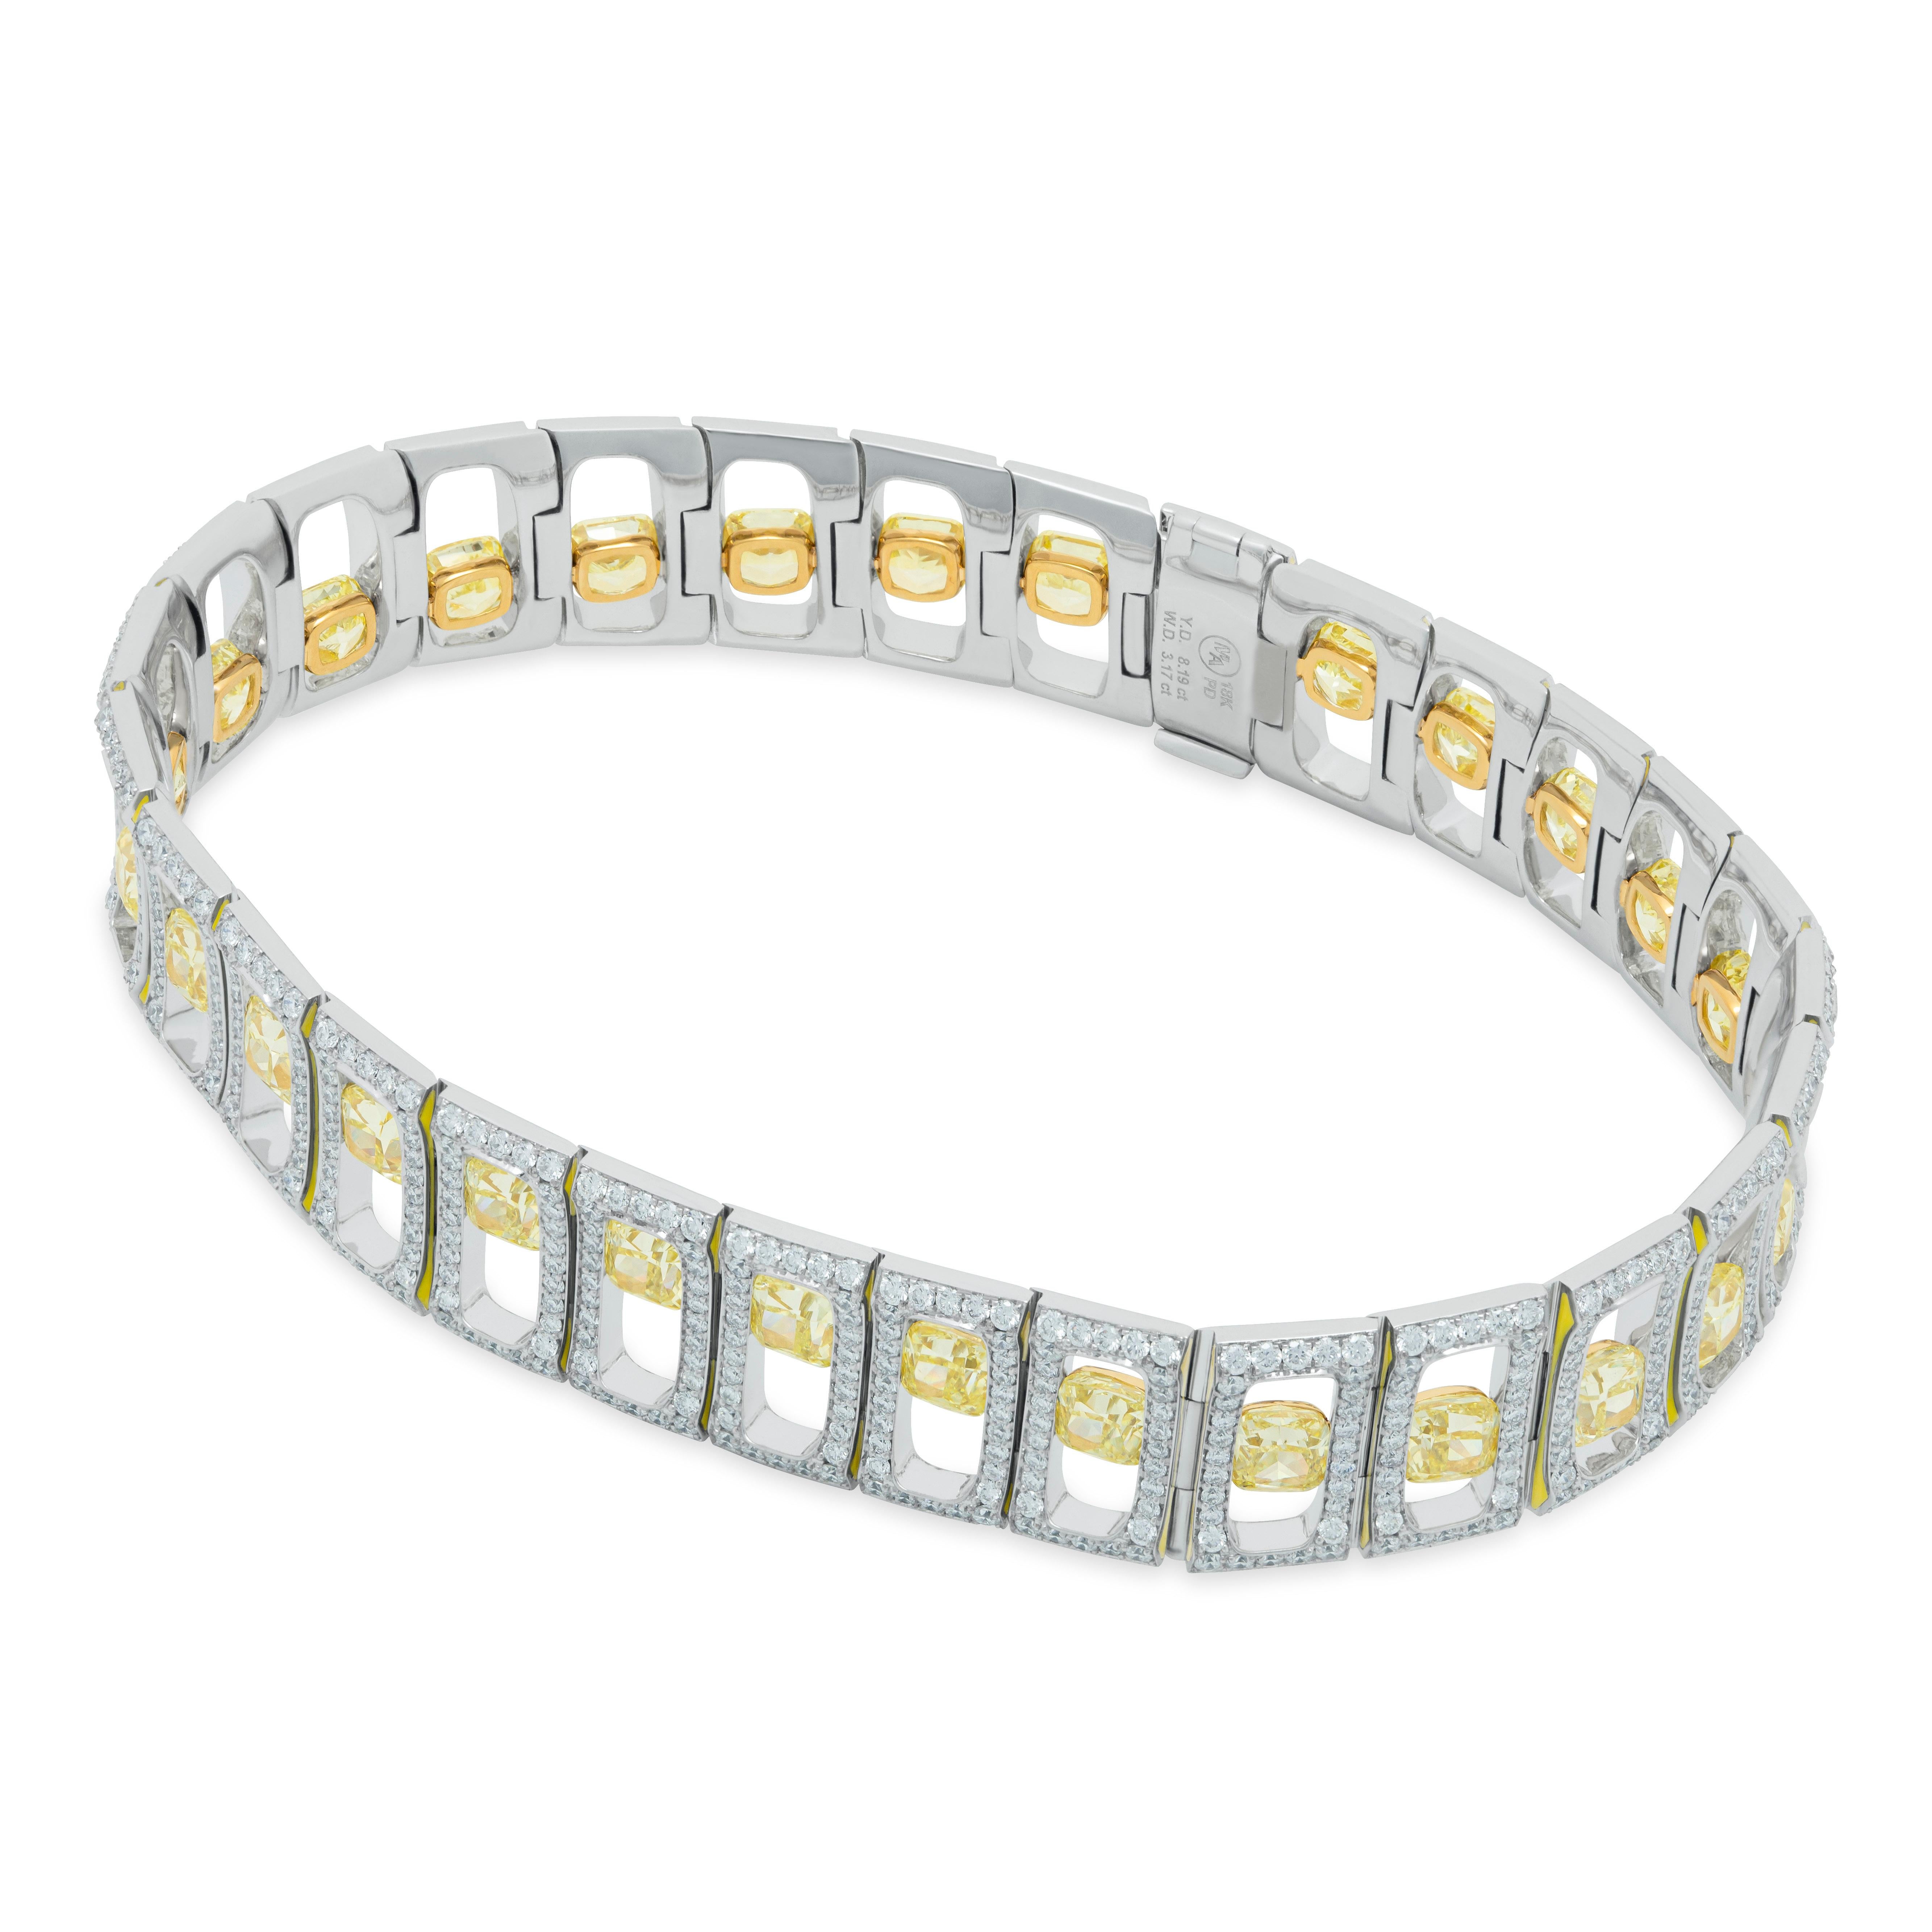 Yellow Diamonds White Diamonds Enamel 18 Karat White Gold High Jewellery Suite

Introducing our latest creation, the Suite of Bracelet and Earrings, inspired by the Art Deco era. This stunning piece features exquisite cushion-shaped yellow diamonds,